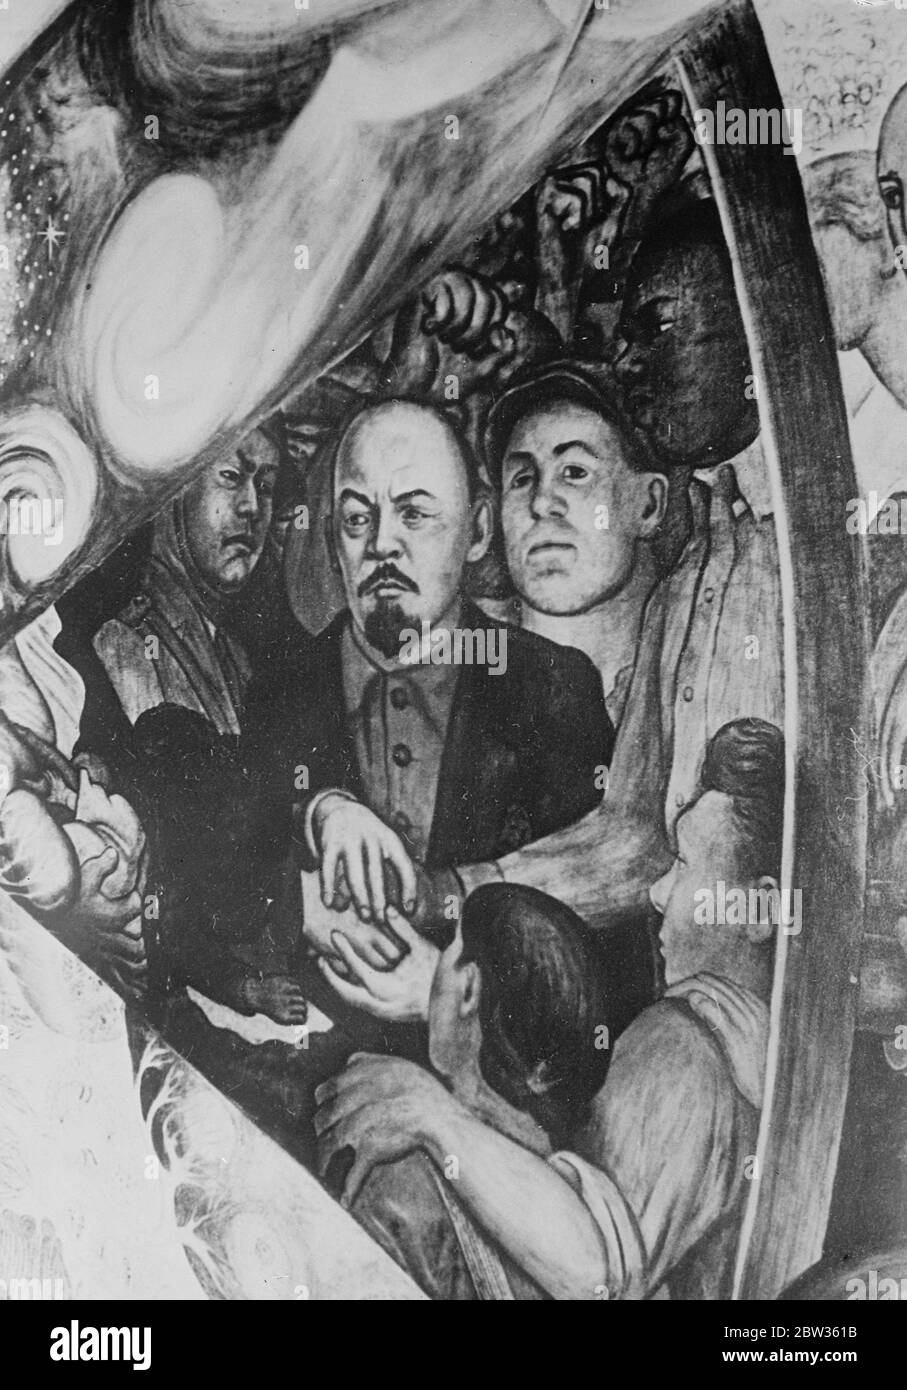 Mexican mural artist dismissed from work at Rockefeller building in New York after painting communist fresco . A mural showing Lenin joining the hands of a soldier and a white coloured worker painted by Senor Diego Rivera , the Mexican artist , has led to his dismissal from further work at the great Rockfeller Centre in New York . Members of Mr John D Rockefeller ' s family took exception to the painting and an ultimatum was delivered to Senor Rivera , which insisted that he must change the fresco or cease work . So far the artist , who is said to have pronounced Communist leanings , has refus Stock Photo